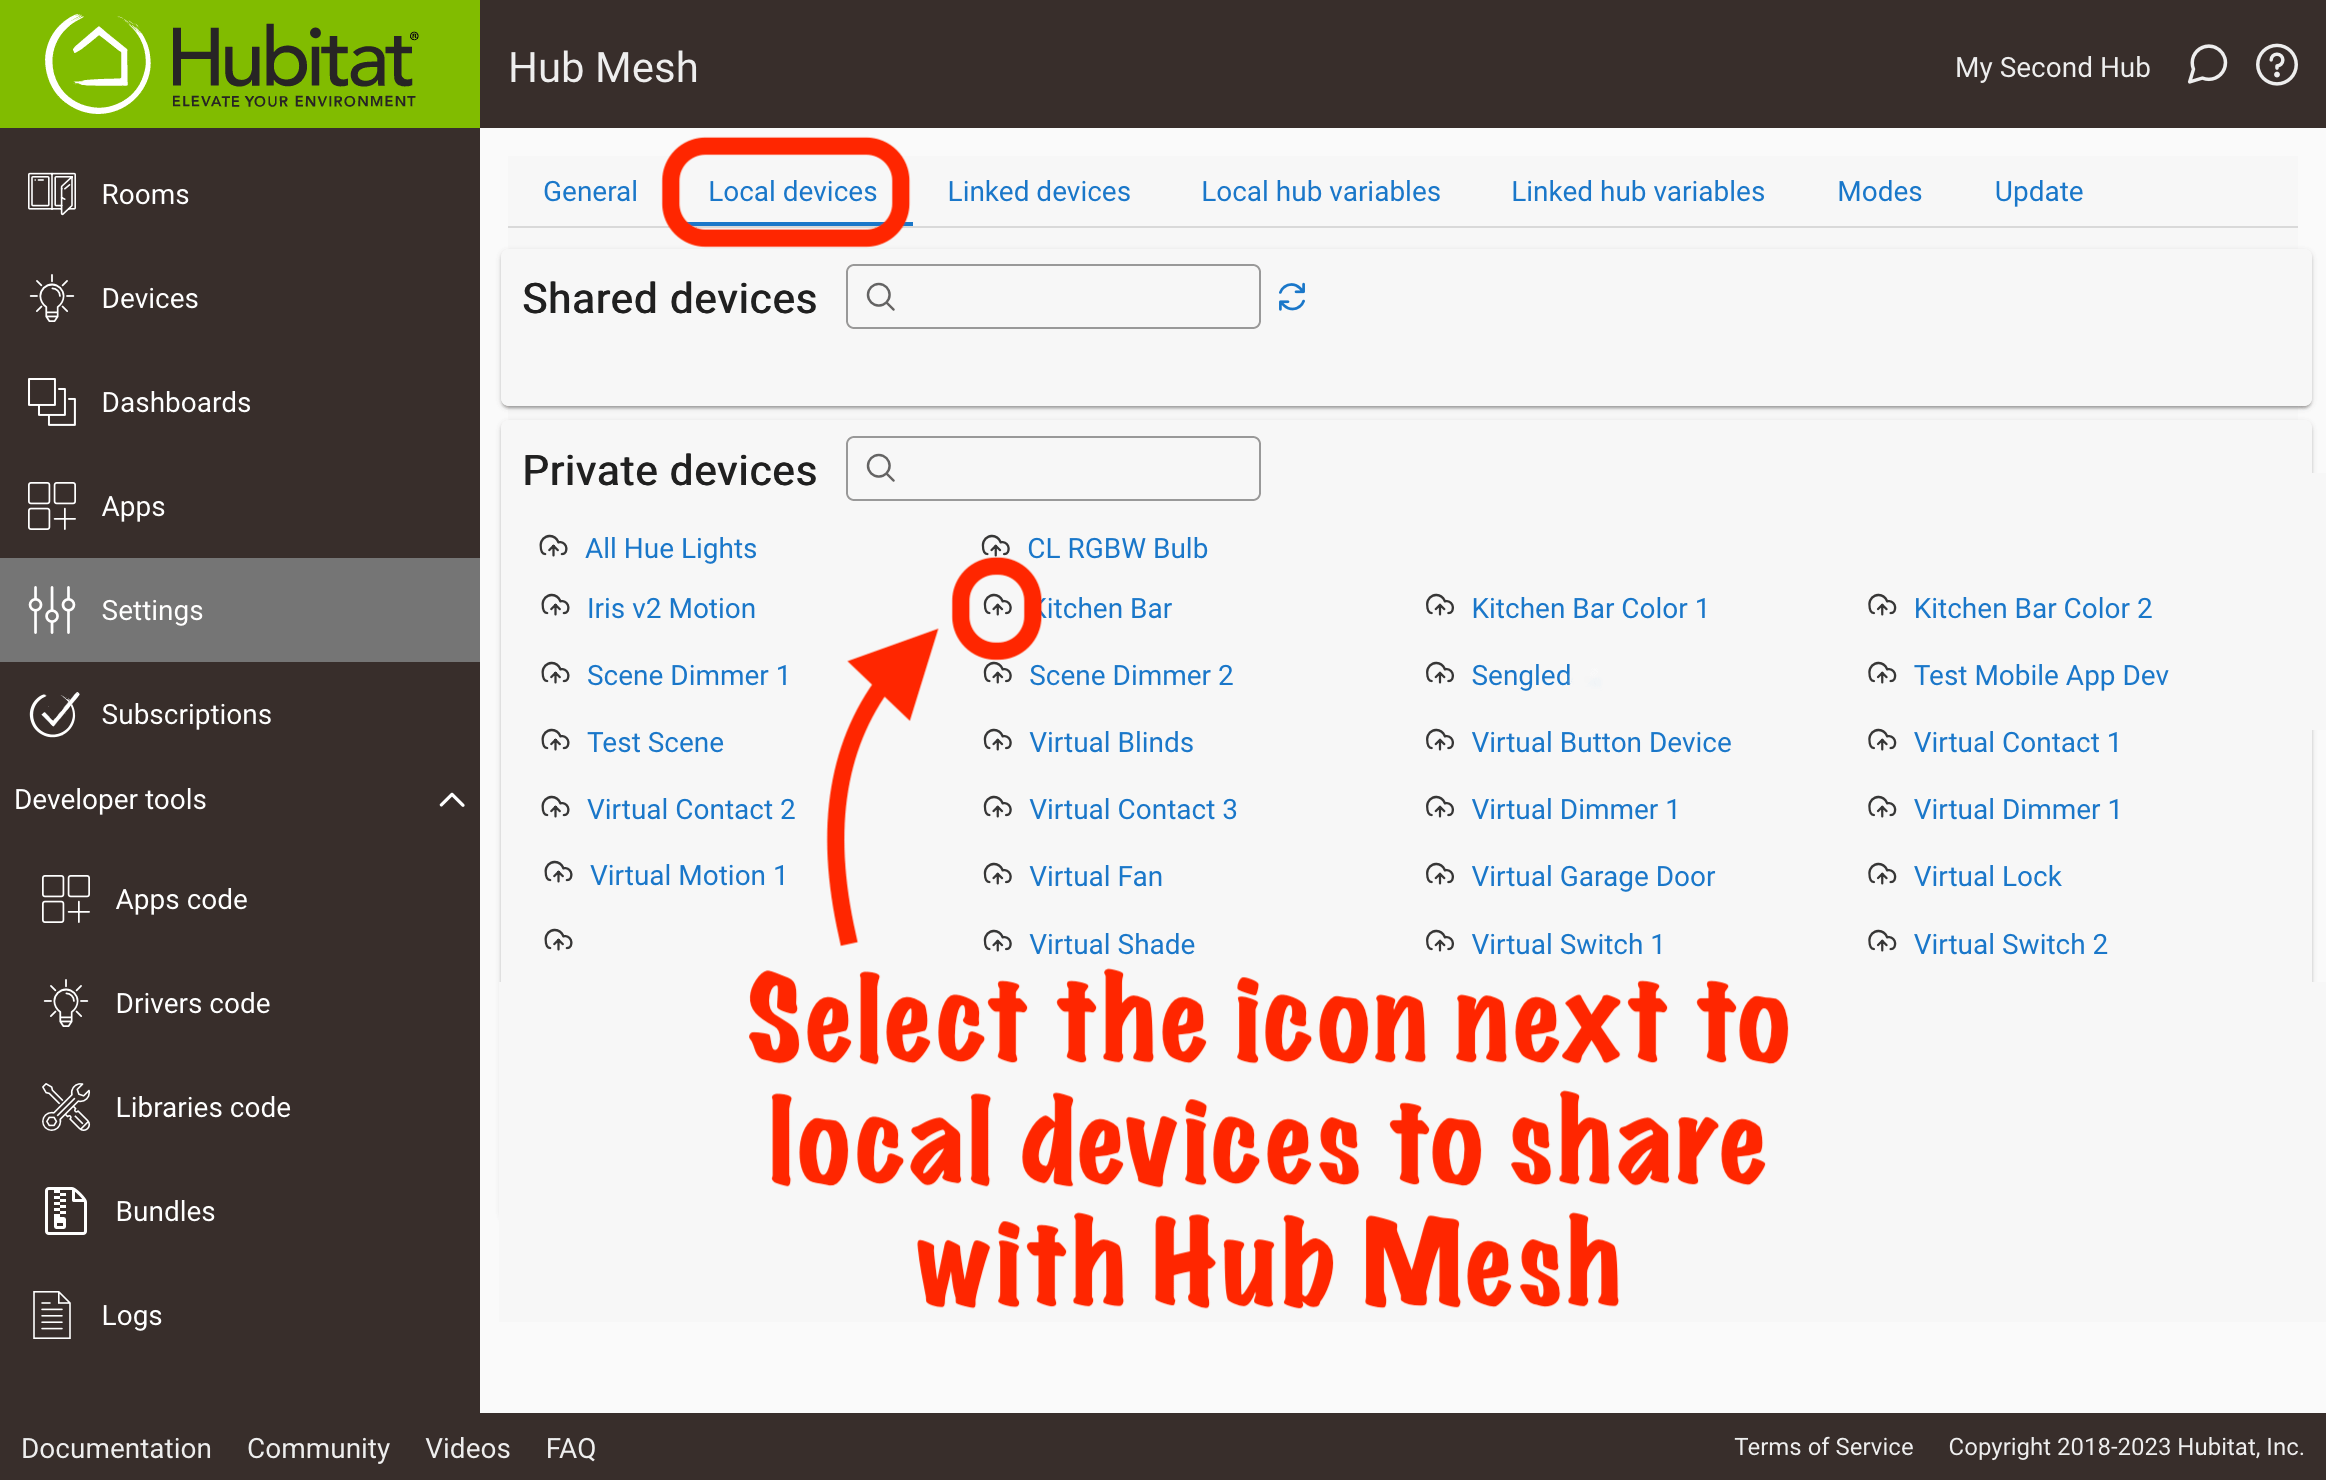 Screenshot of Shared Devices (devices added to Hub Mesh) and Private Devices (devices eligible to be added but that have not been added to Hub Mesh)